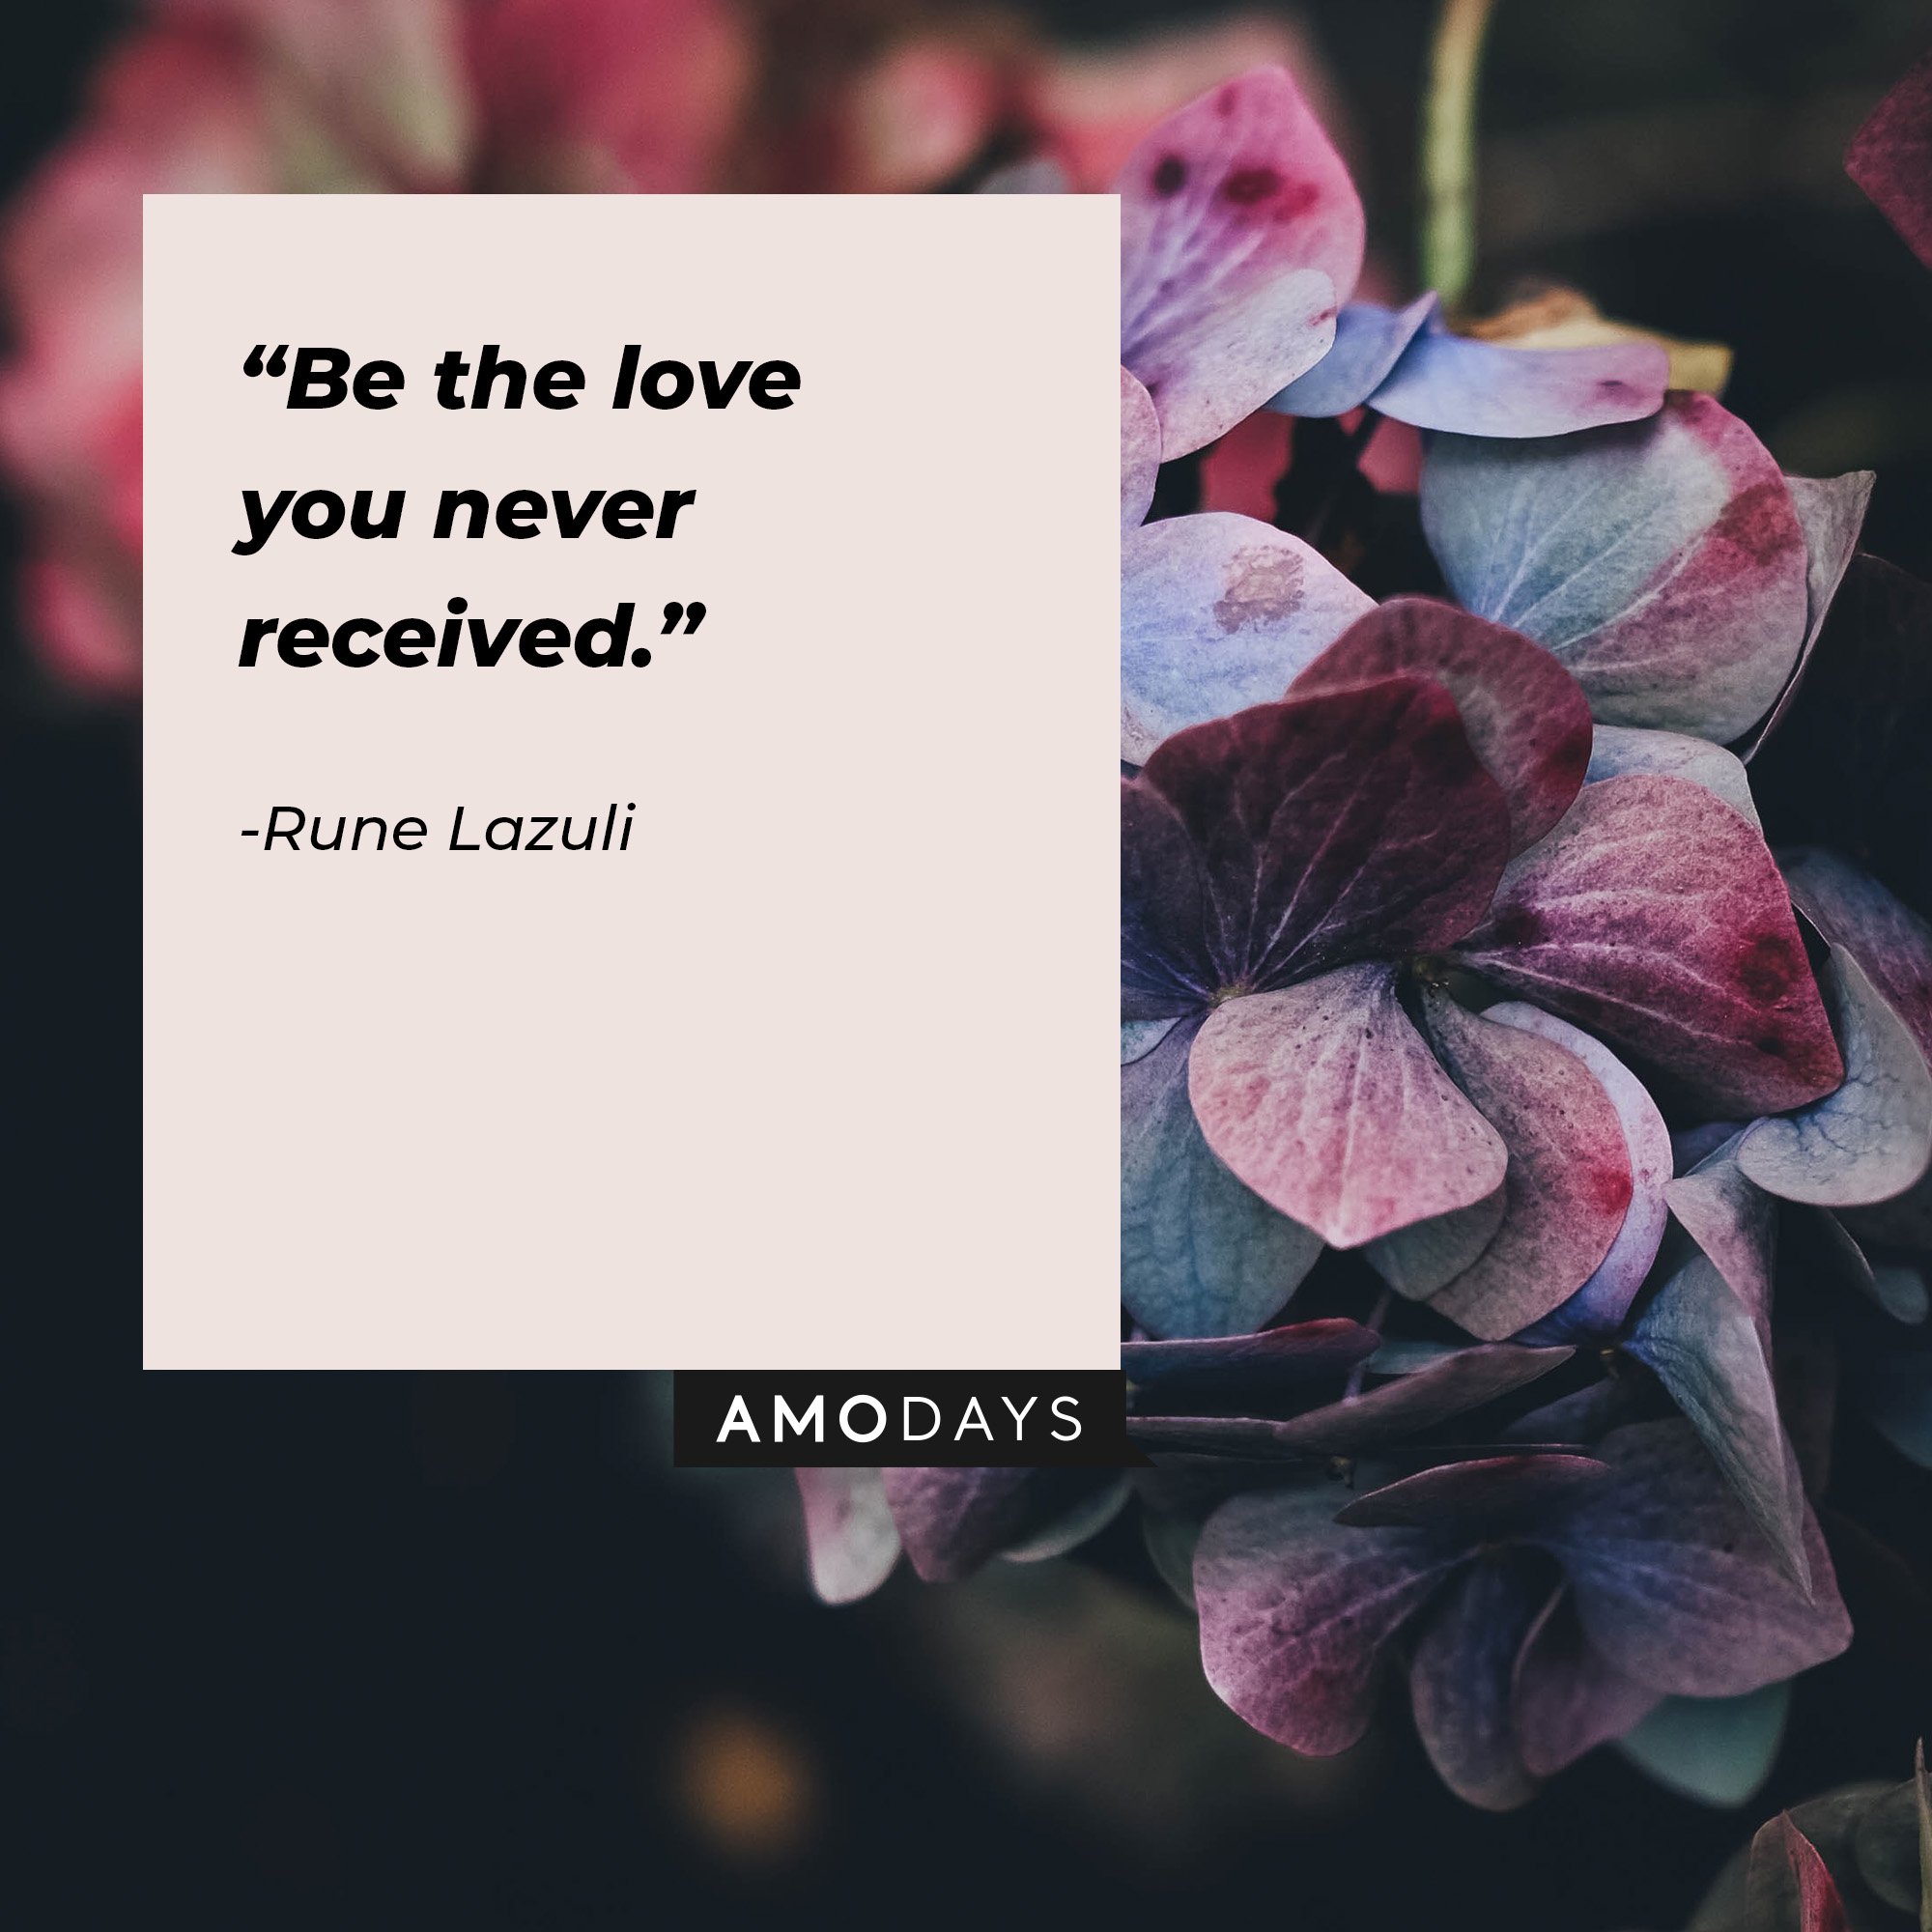 Rune Lazuli’s quote: “Be the love you never received.” | Image: AmoDays  